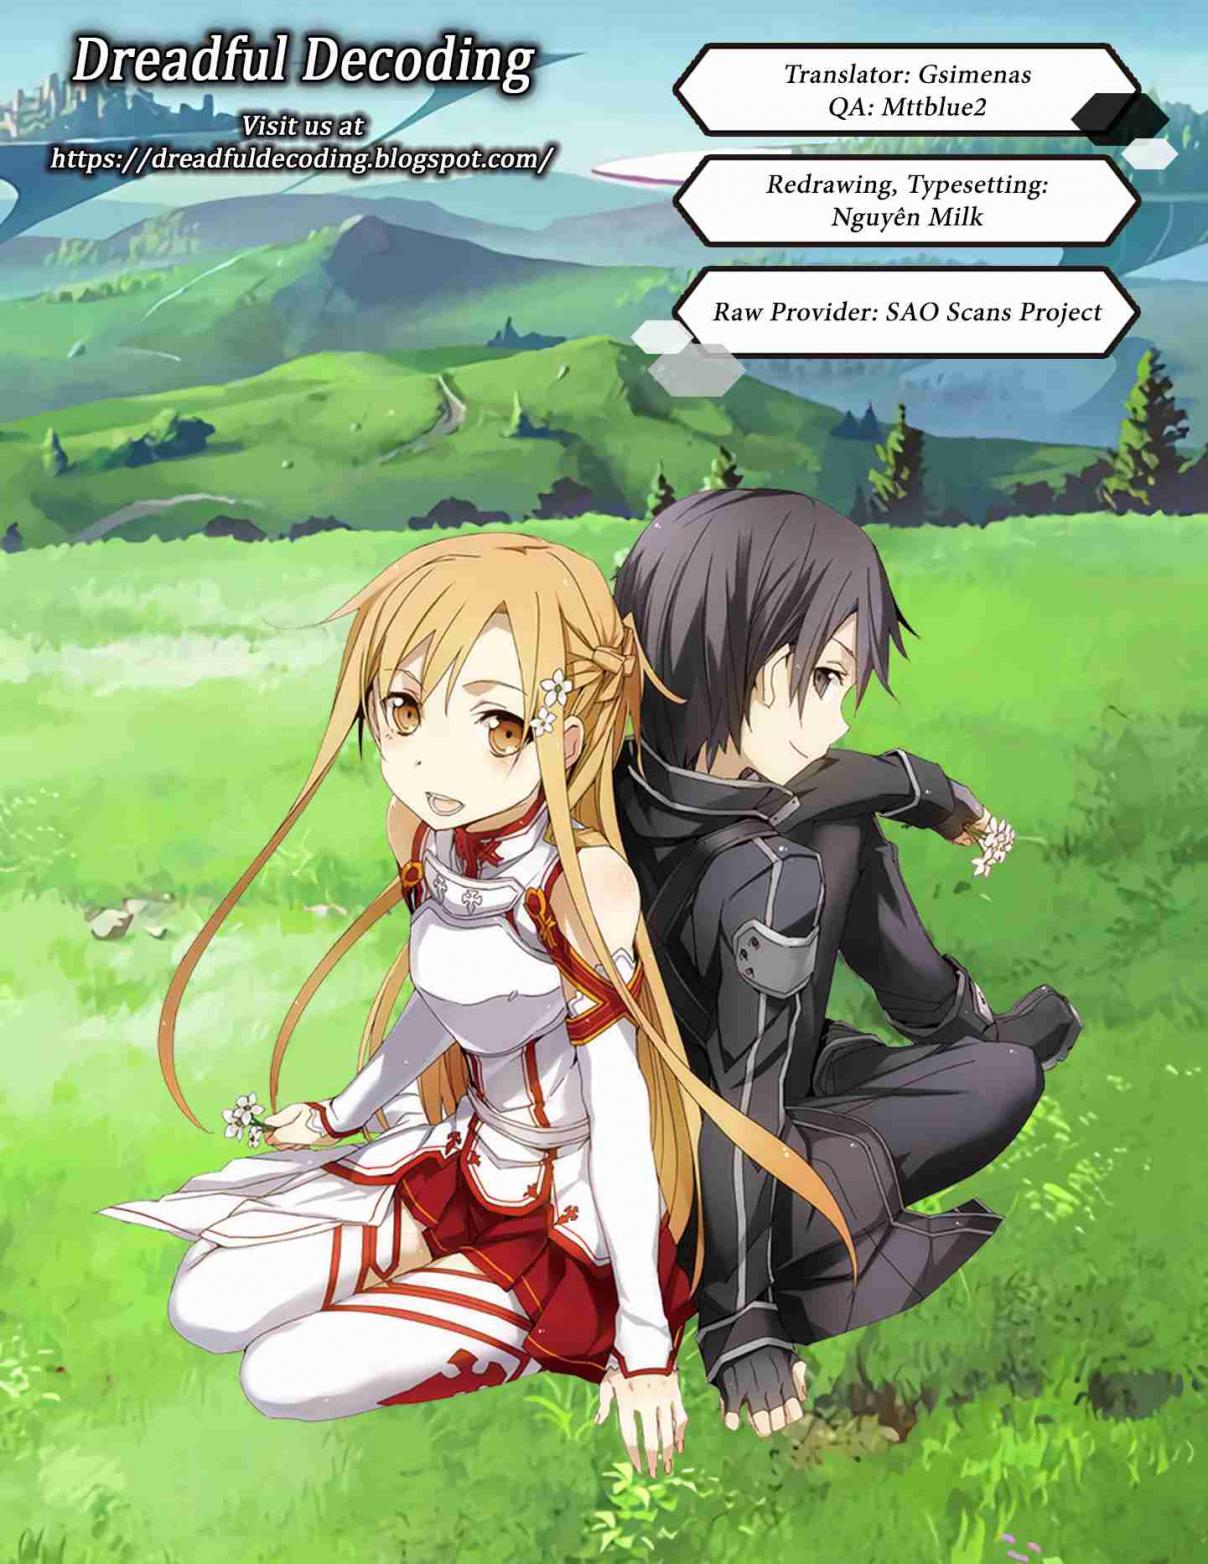 Sword Art Online Ordinal Scale Vol. 4 Ch. 14.5 Extra Chapter 2